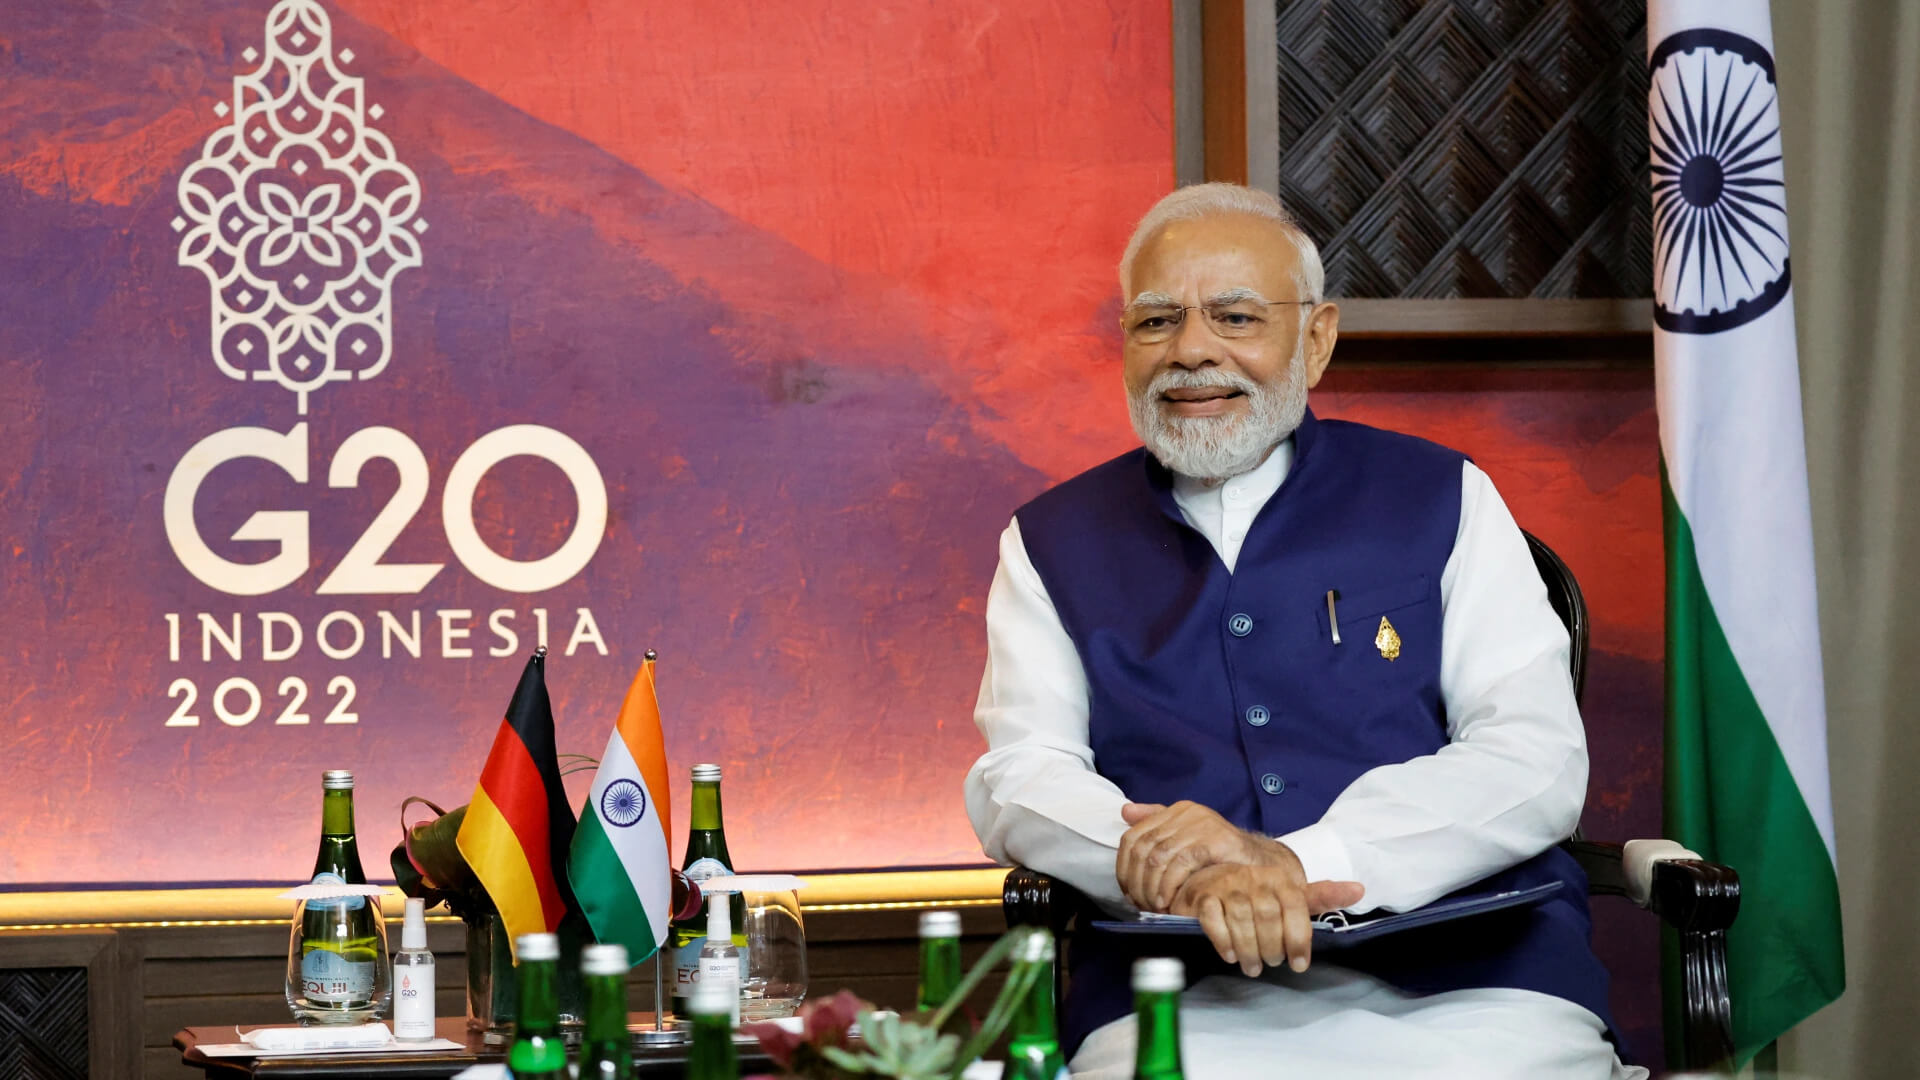 EU Lauds India as “Influential Voice” Ahead of G20 Meet